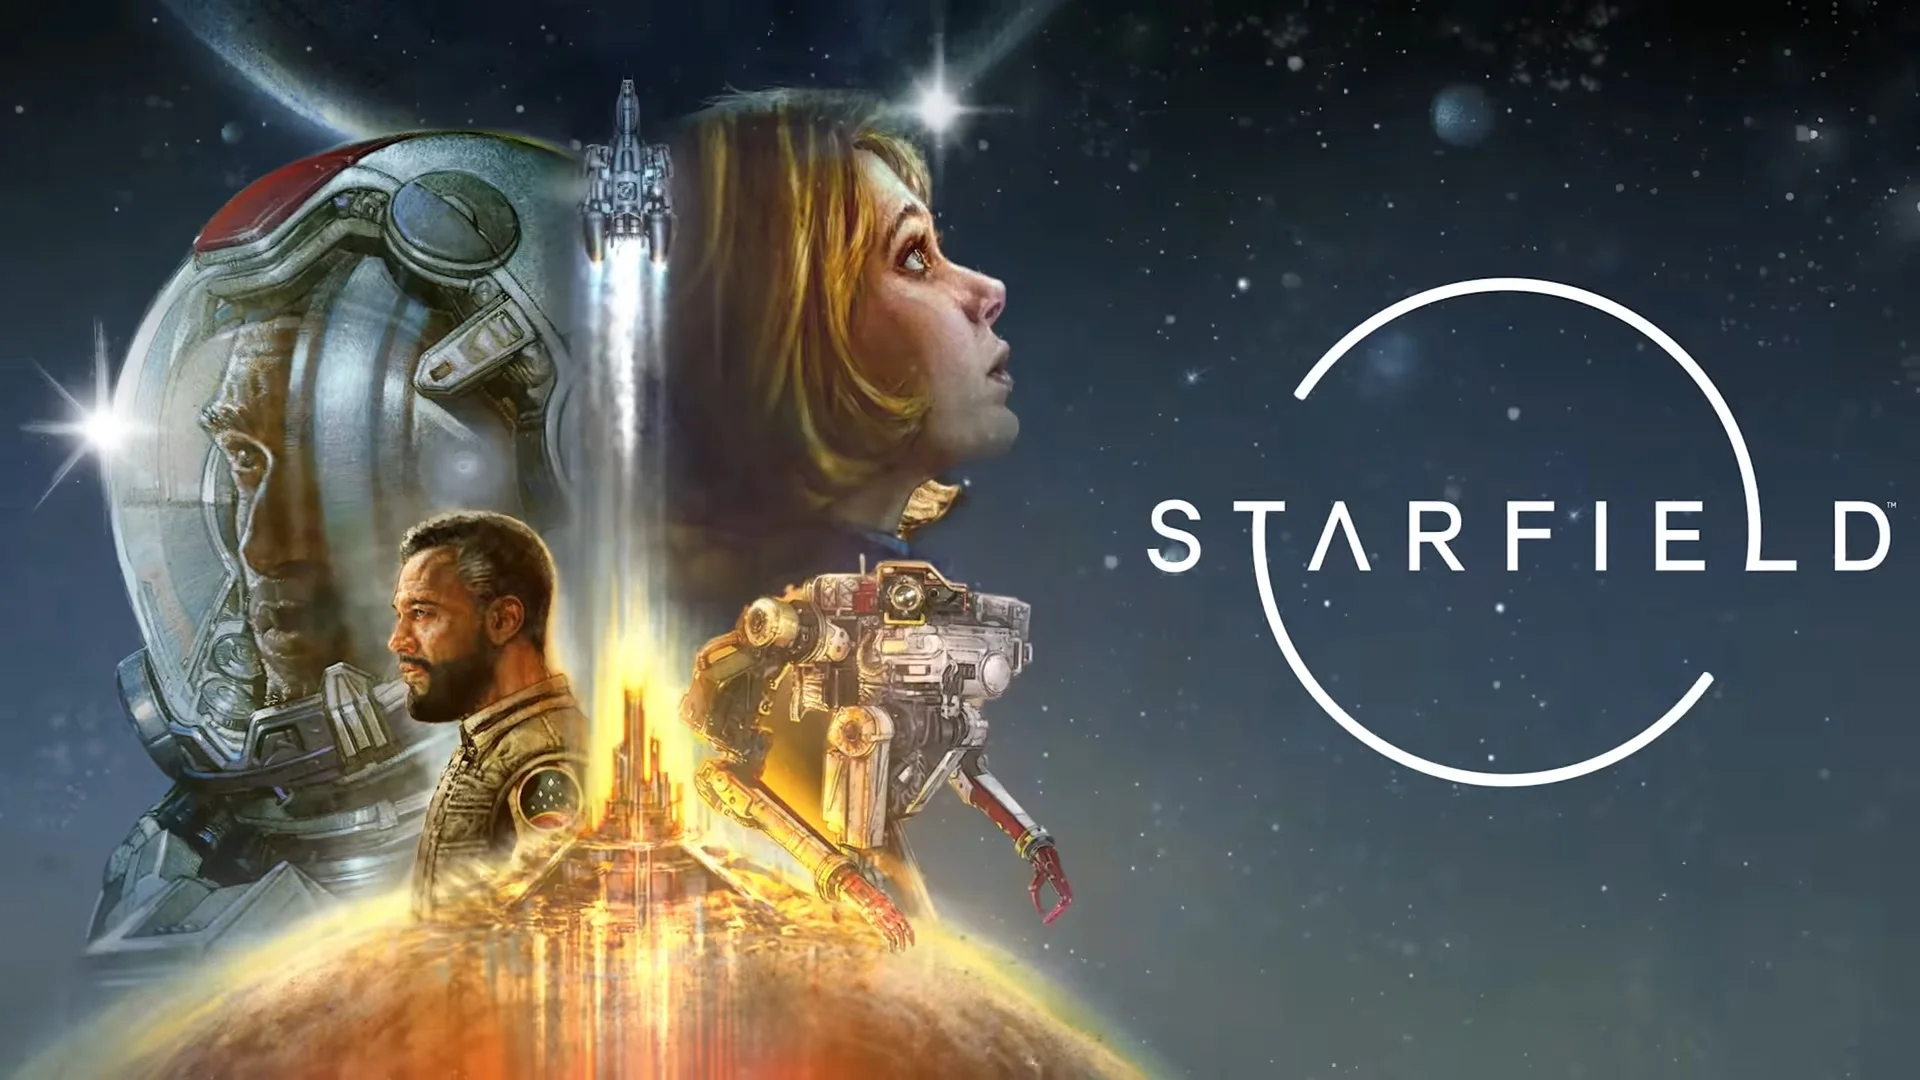 Actress Chloe Grace Moretz admitted that the game Starfield was quite addictive